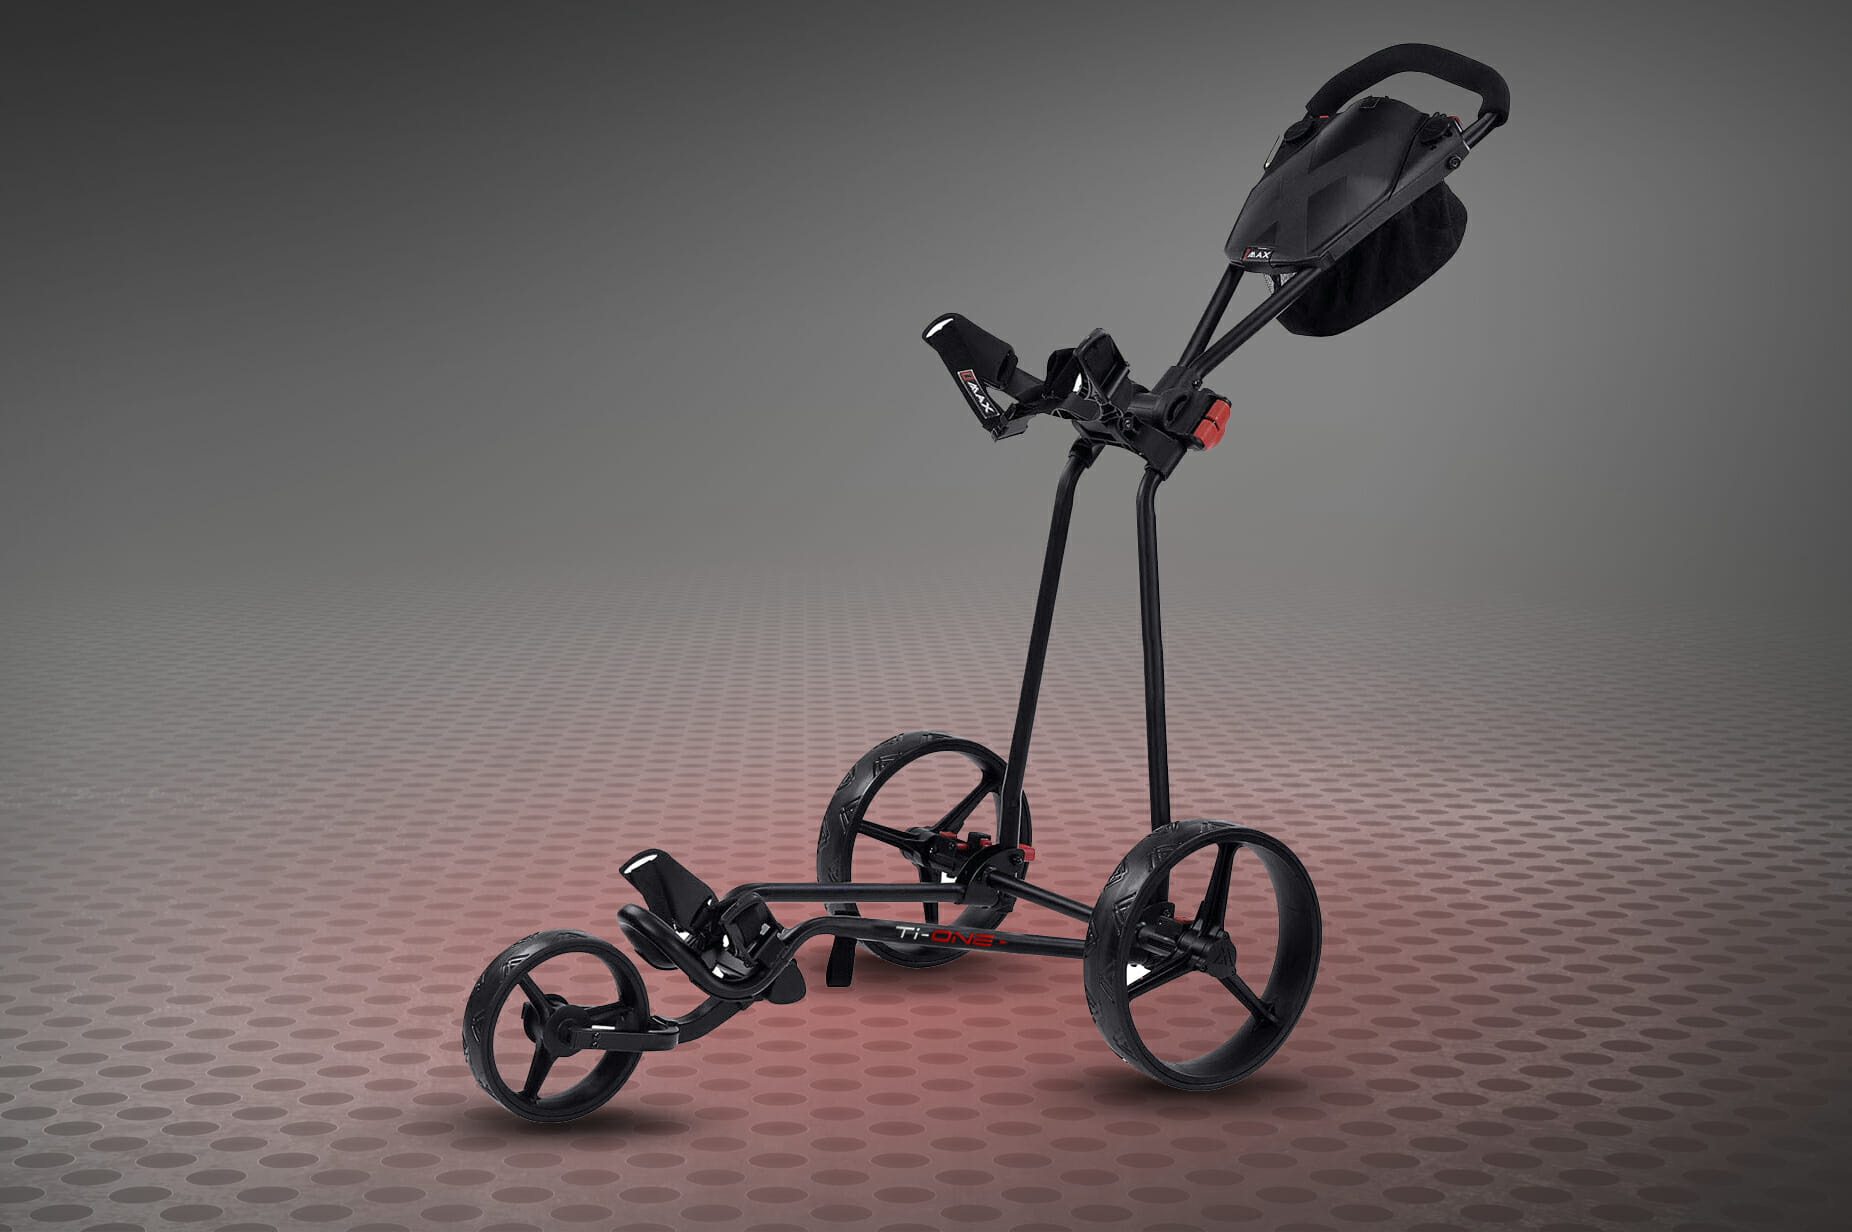 Big Max launches TI One Push Cart for 2019